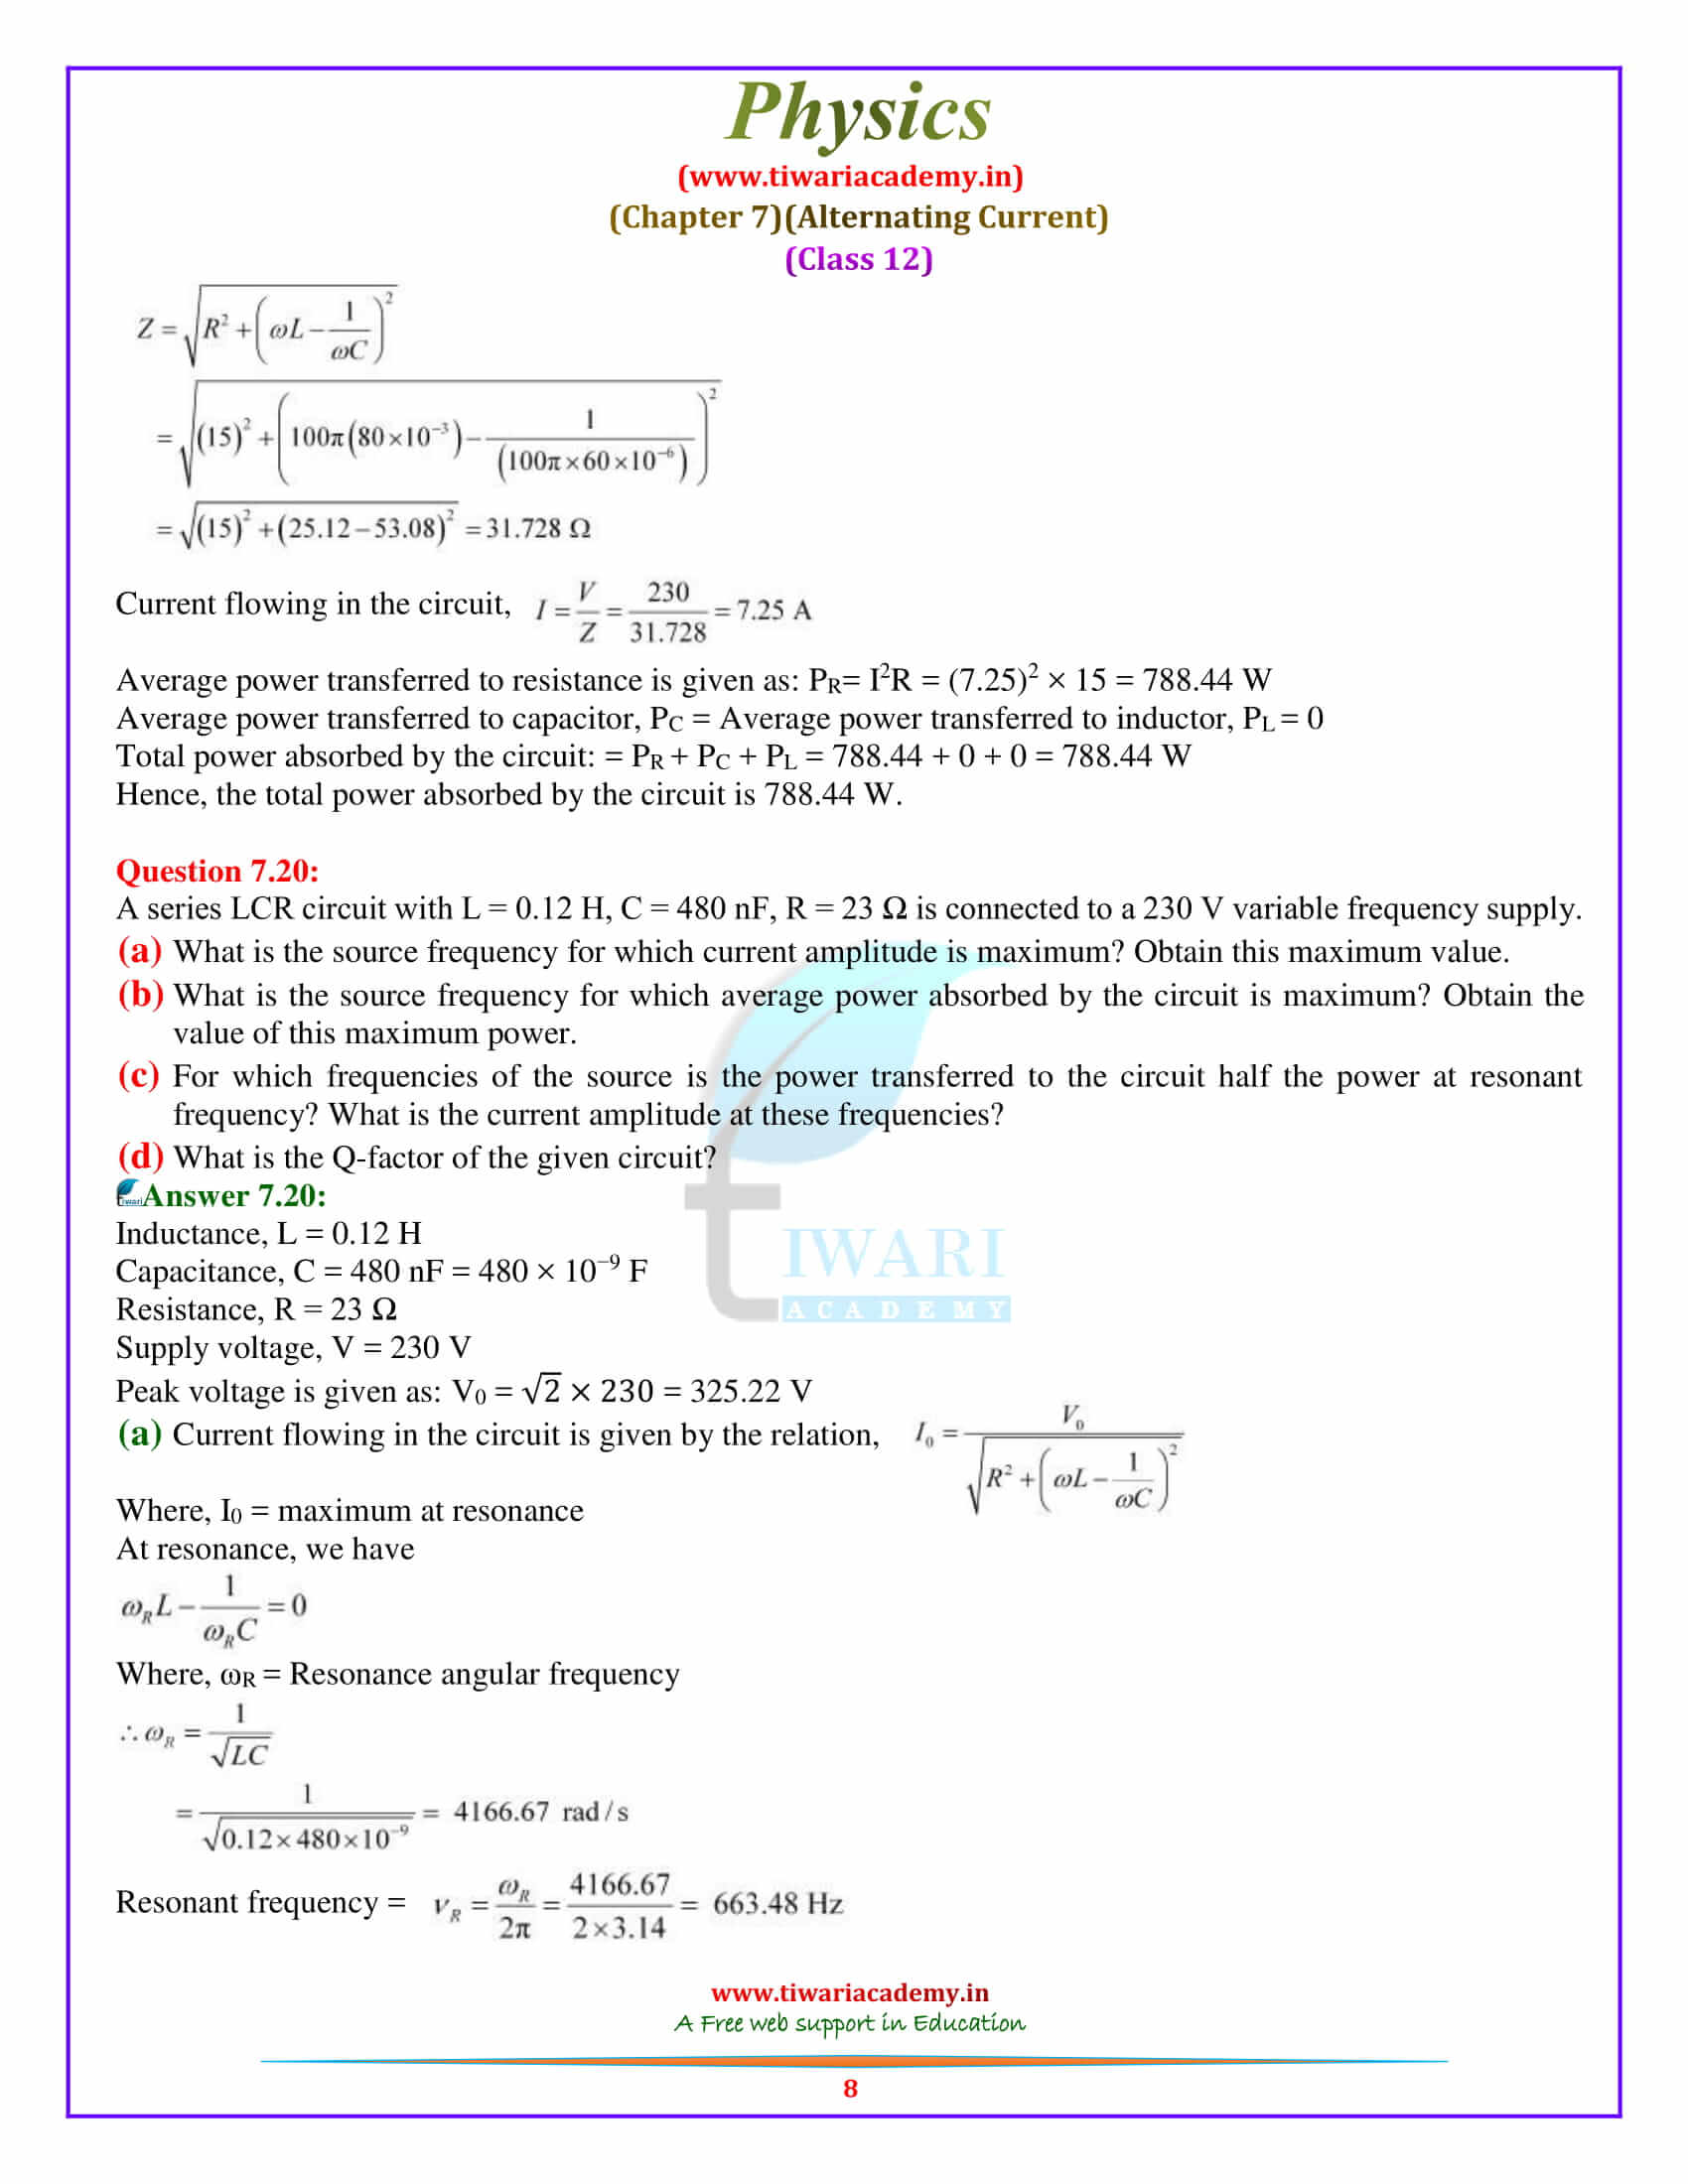 12 Physics Chapter 7 Alternating Current solutions download in pdf